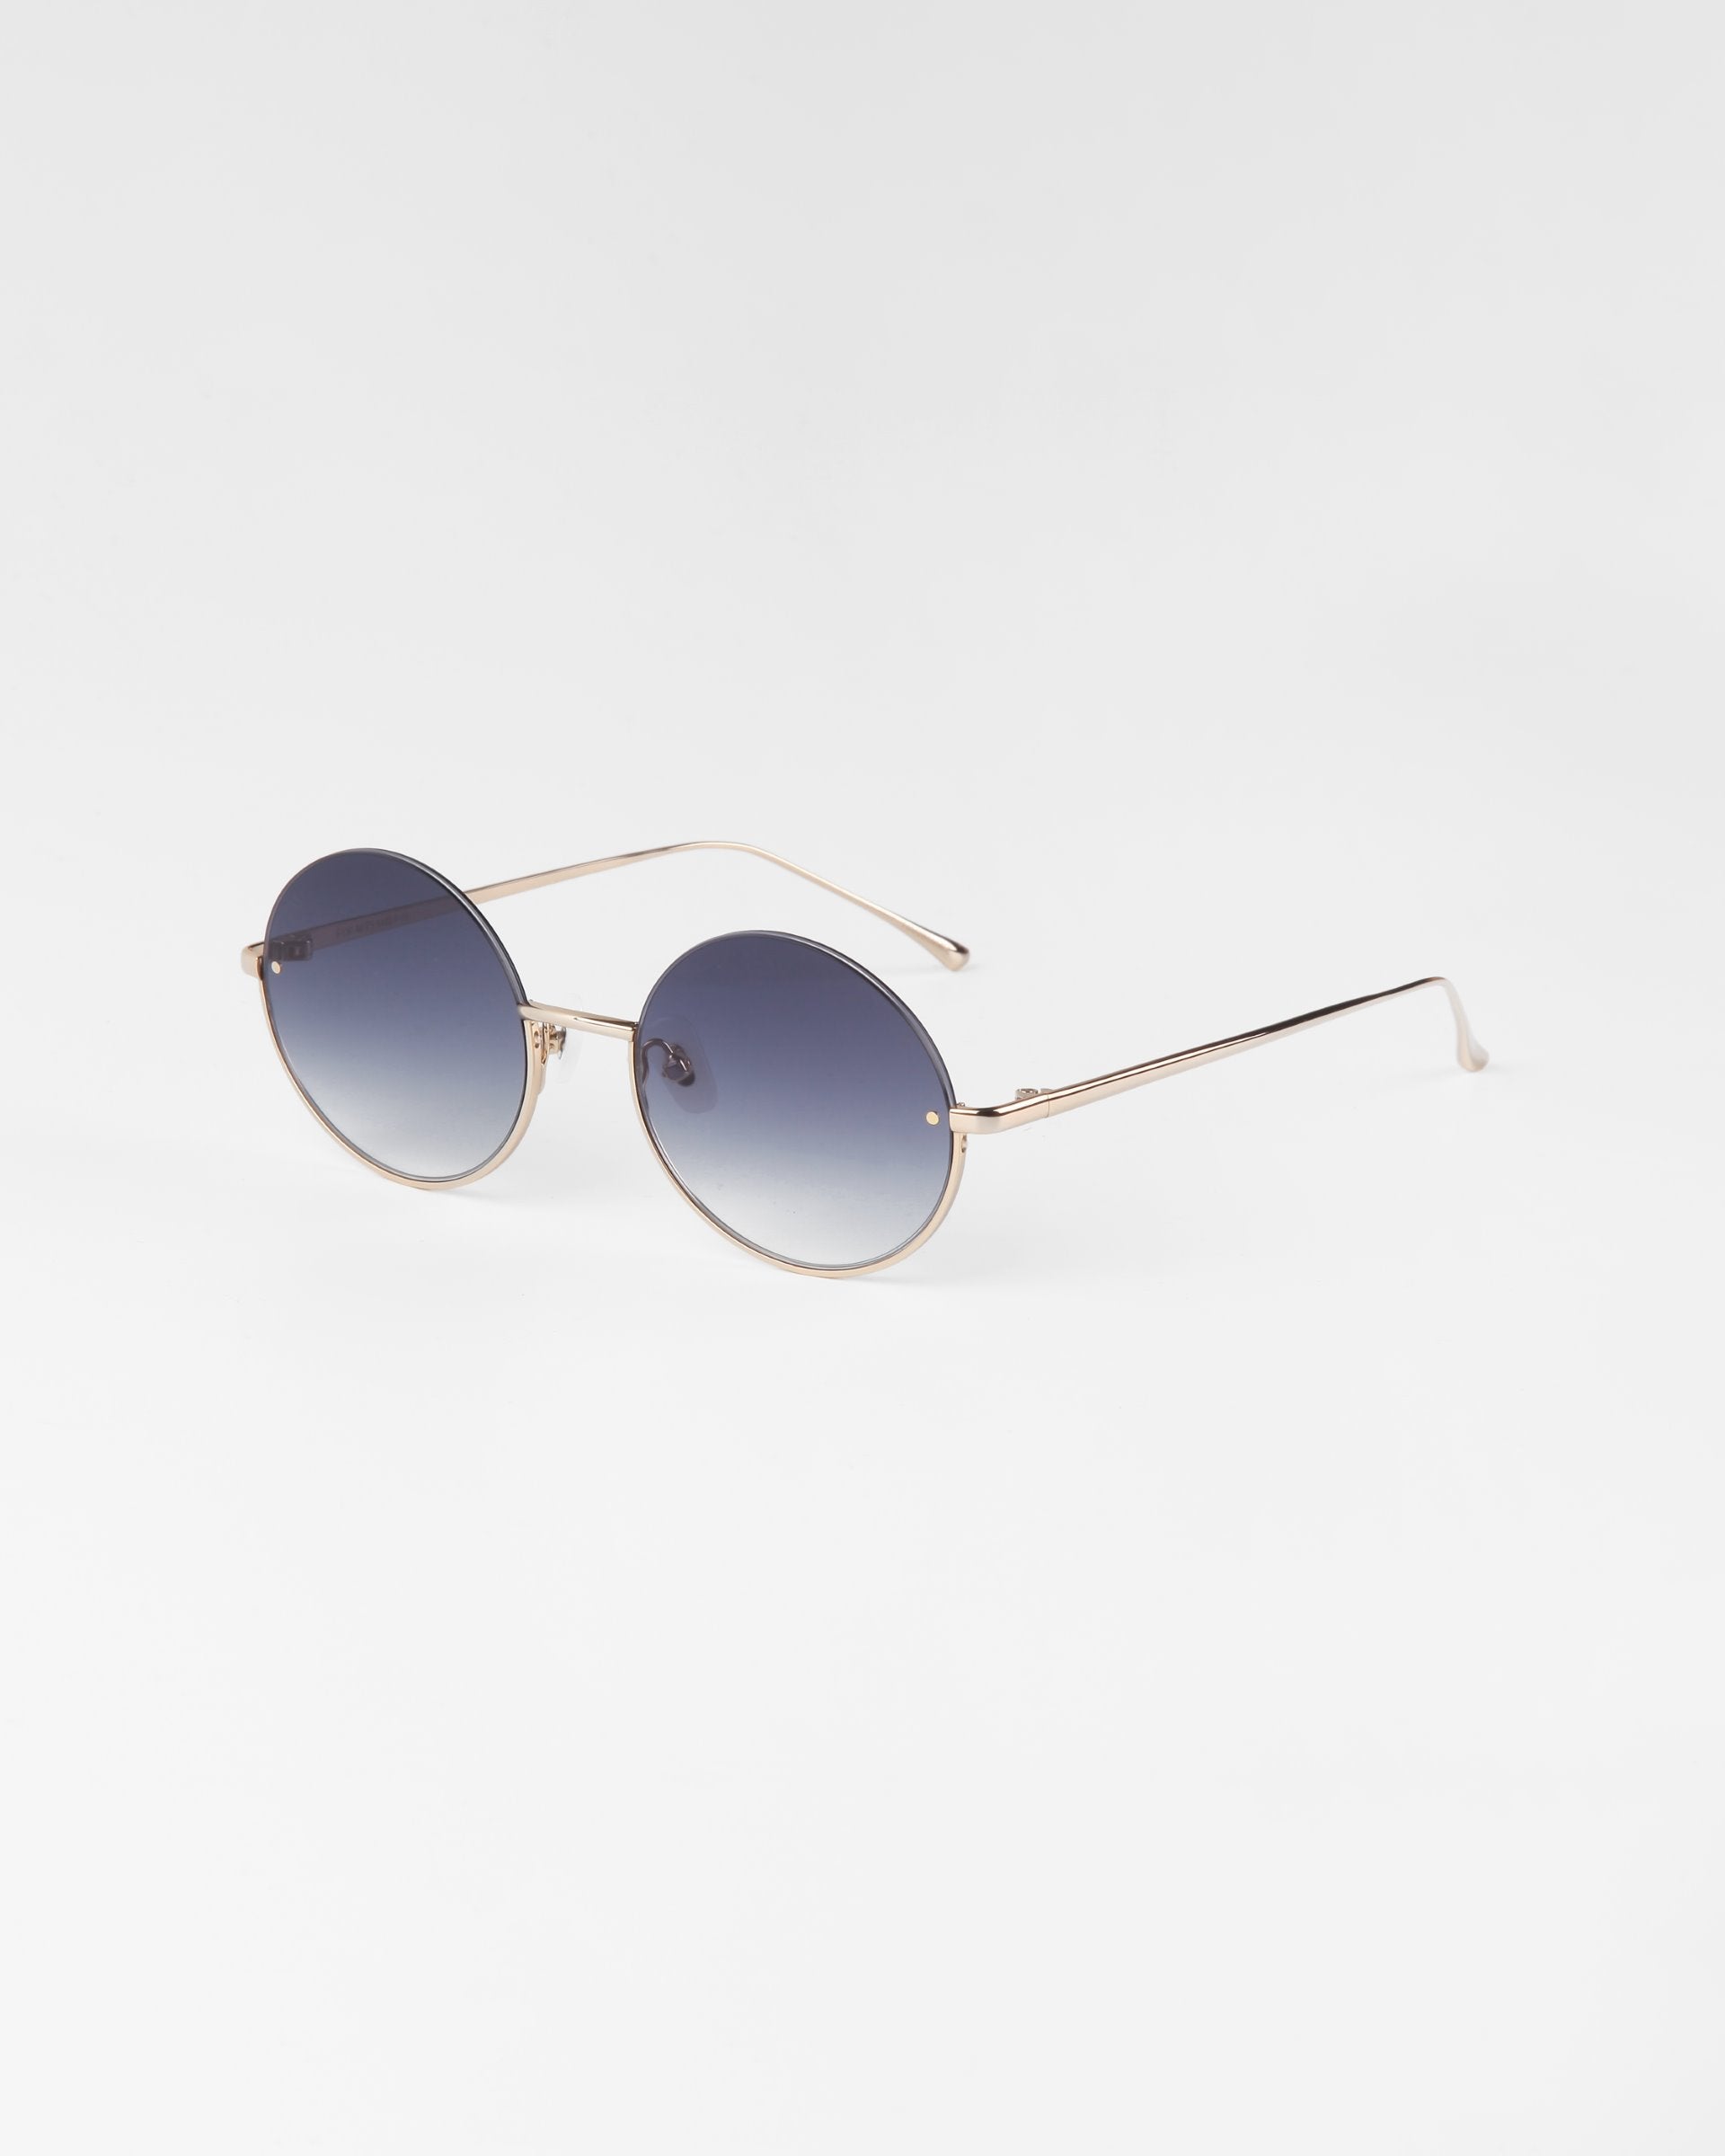 Skyline sunglasses by For Art's Sake® with 18-karat gold plated frames and gradient blue-tinted lenses. The thin arms of the glasses match the luxurious gold frame, creating a stylish and modern look. The background is a plain white surface.